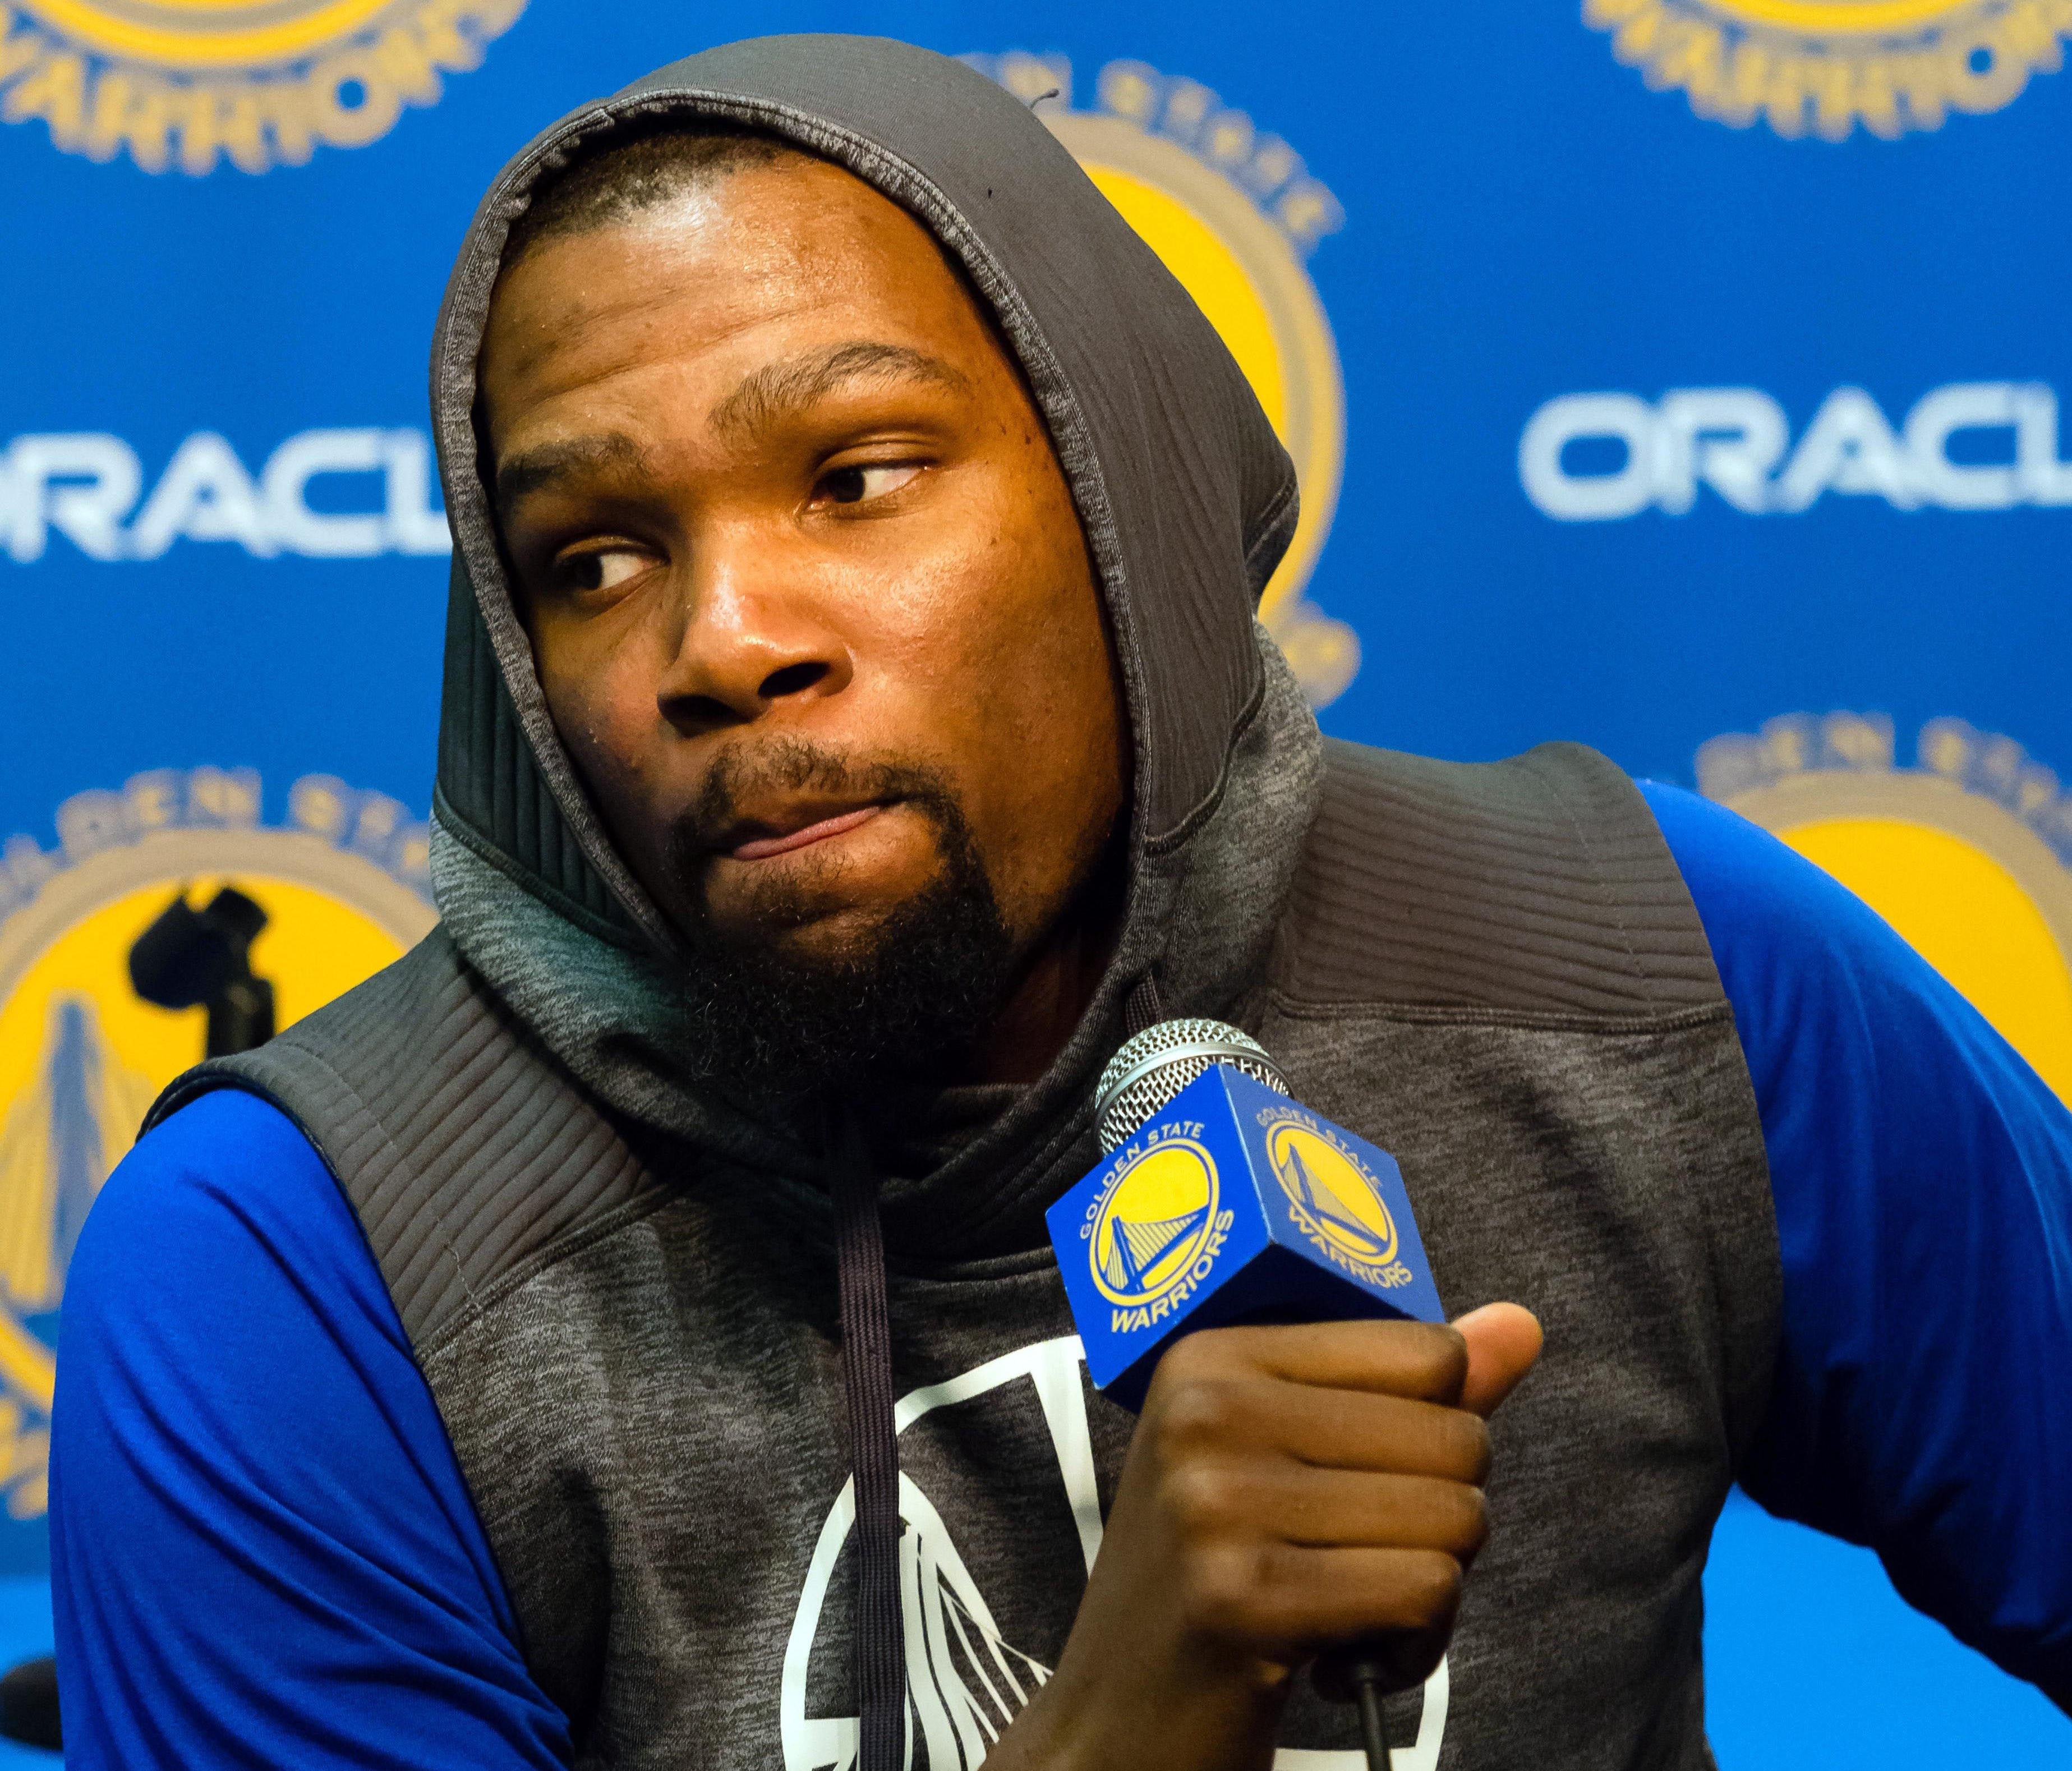 Warriors forward Kevin Durant speaks to the media about his knee injury before Golden State's game against the Boston Celtics at Oracle Arena in Oakland.